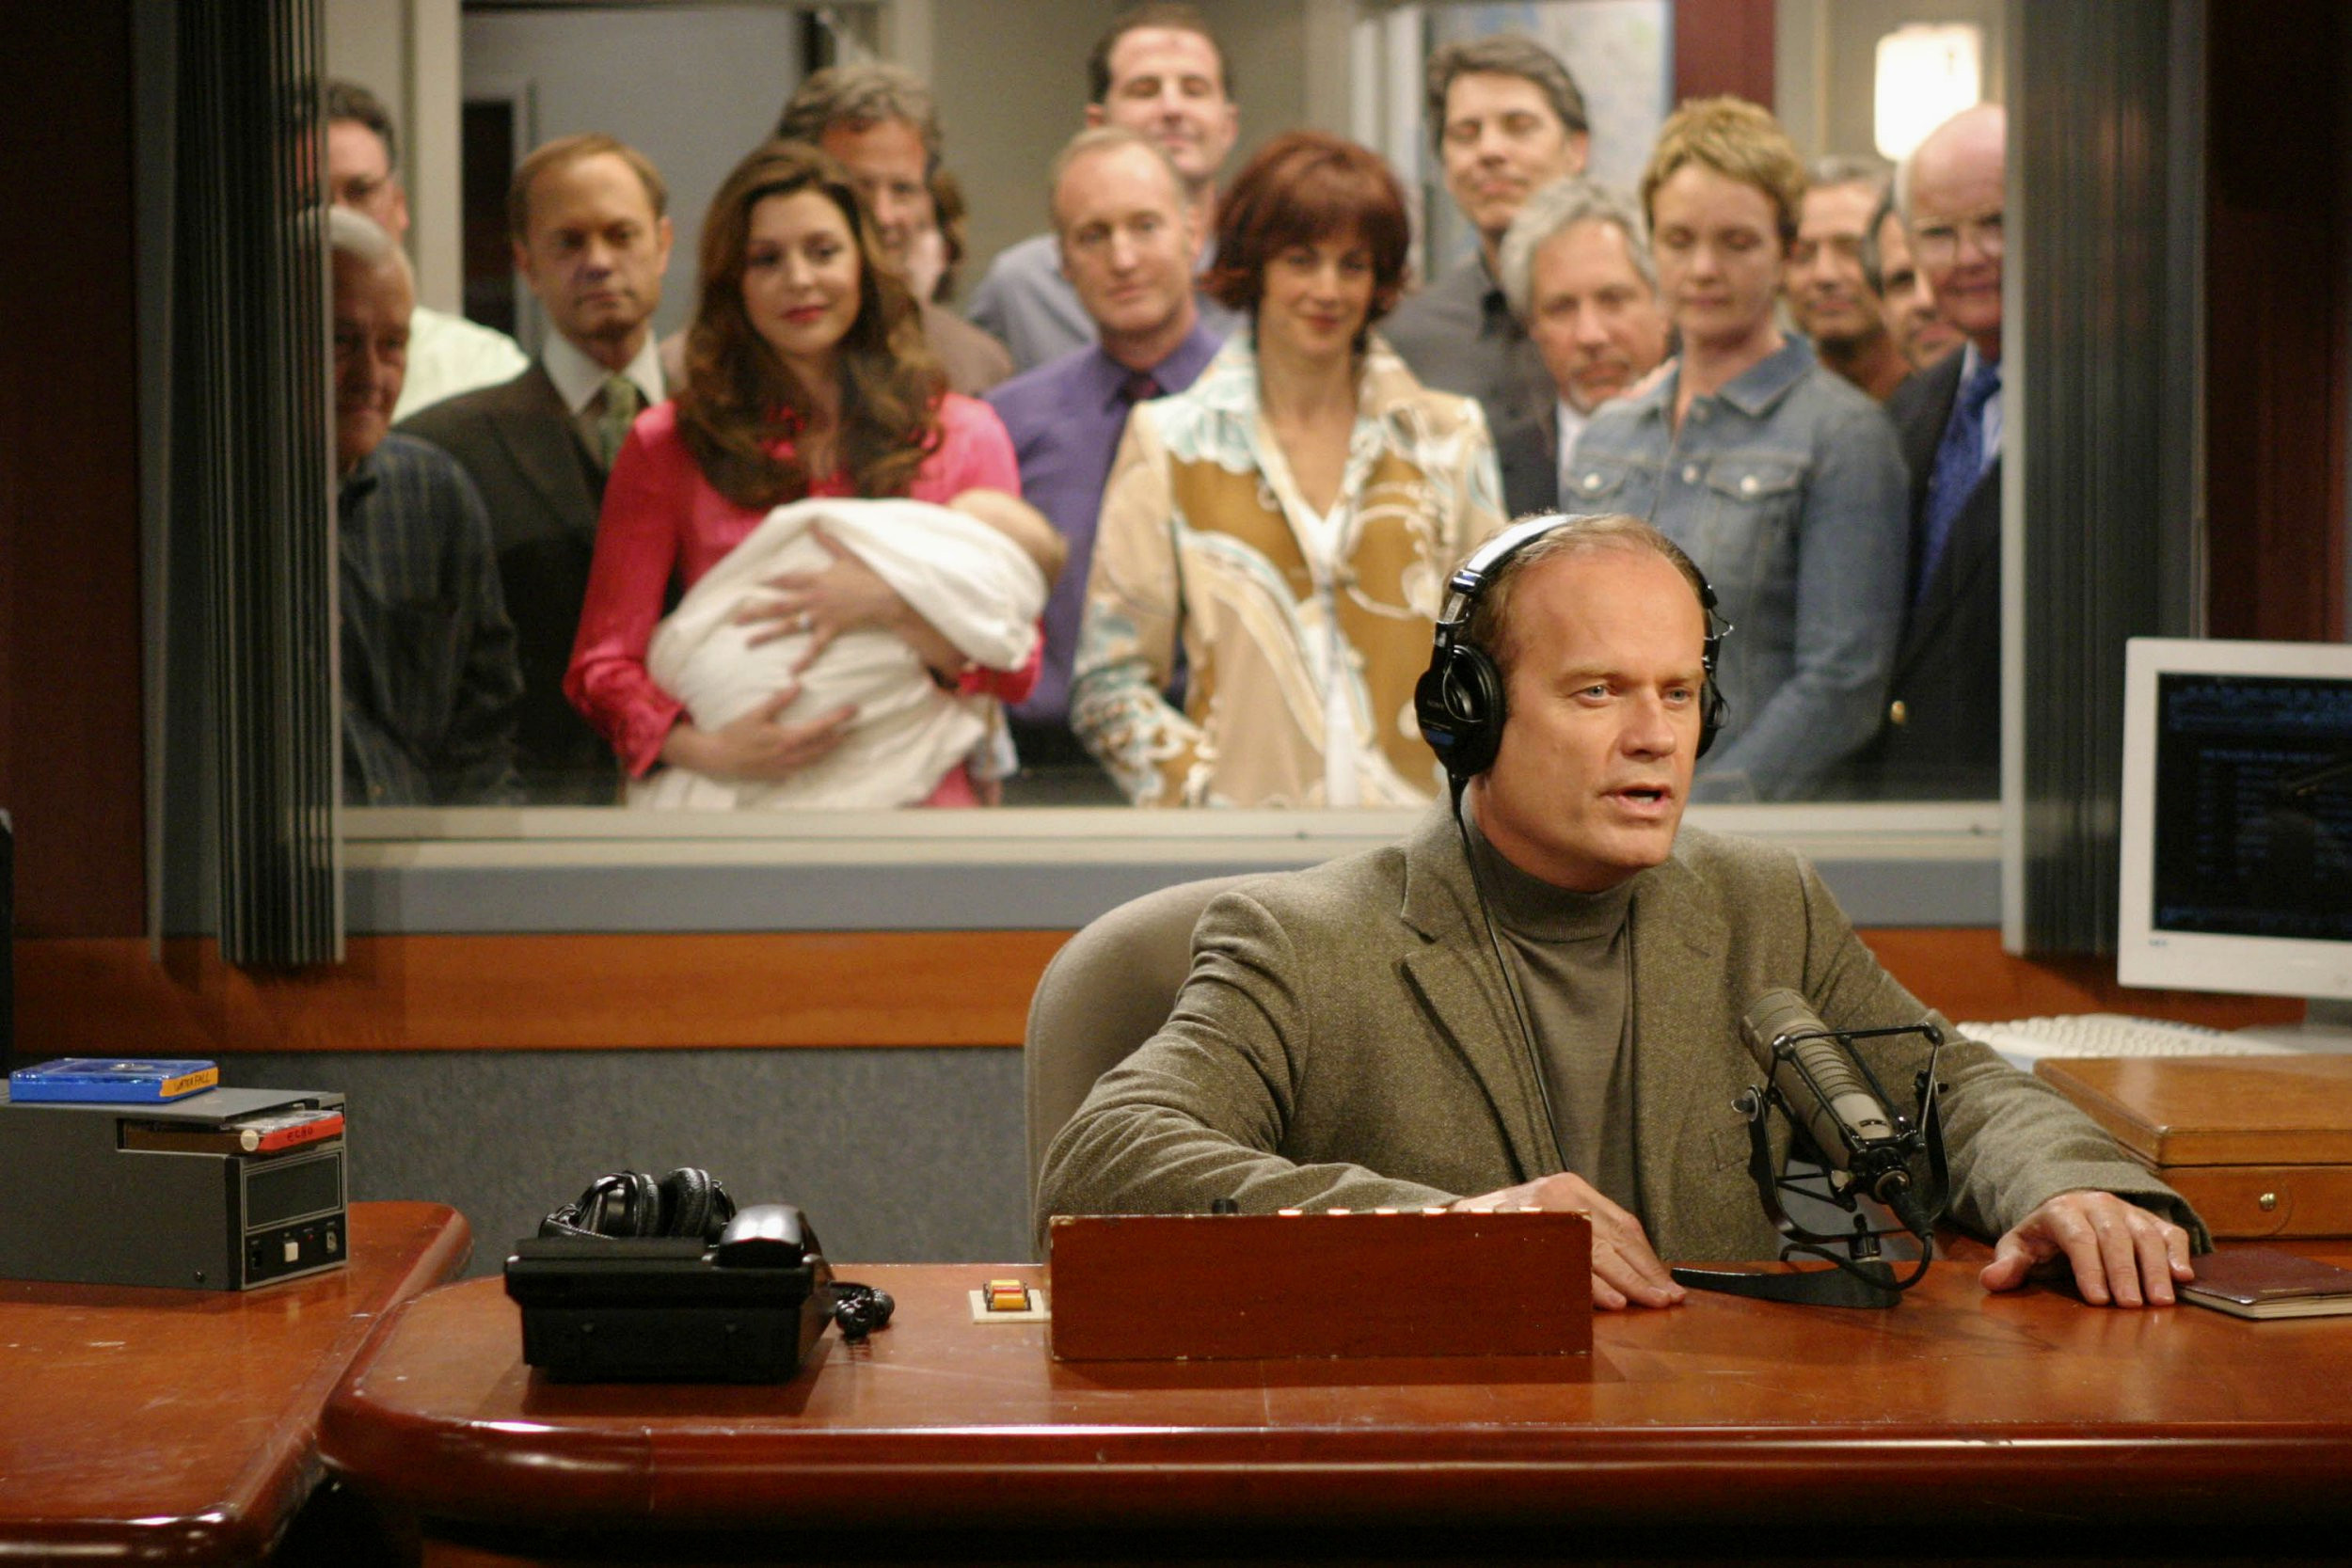 Frasier revival starring Kelsey Grammer and David Hyde Pierce could be heading to Paramount Plus